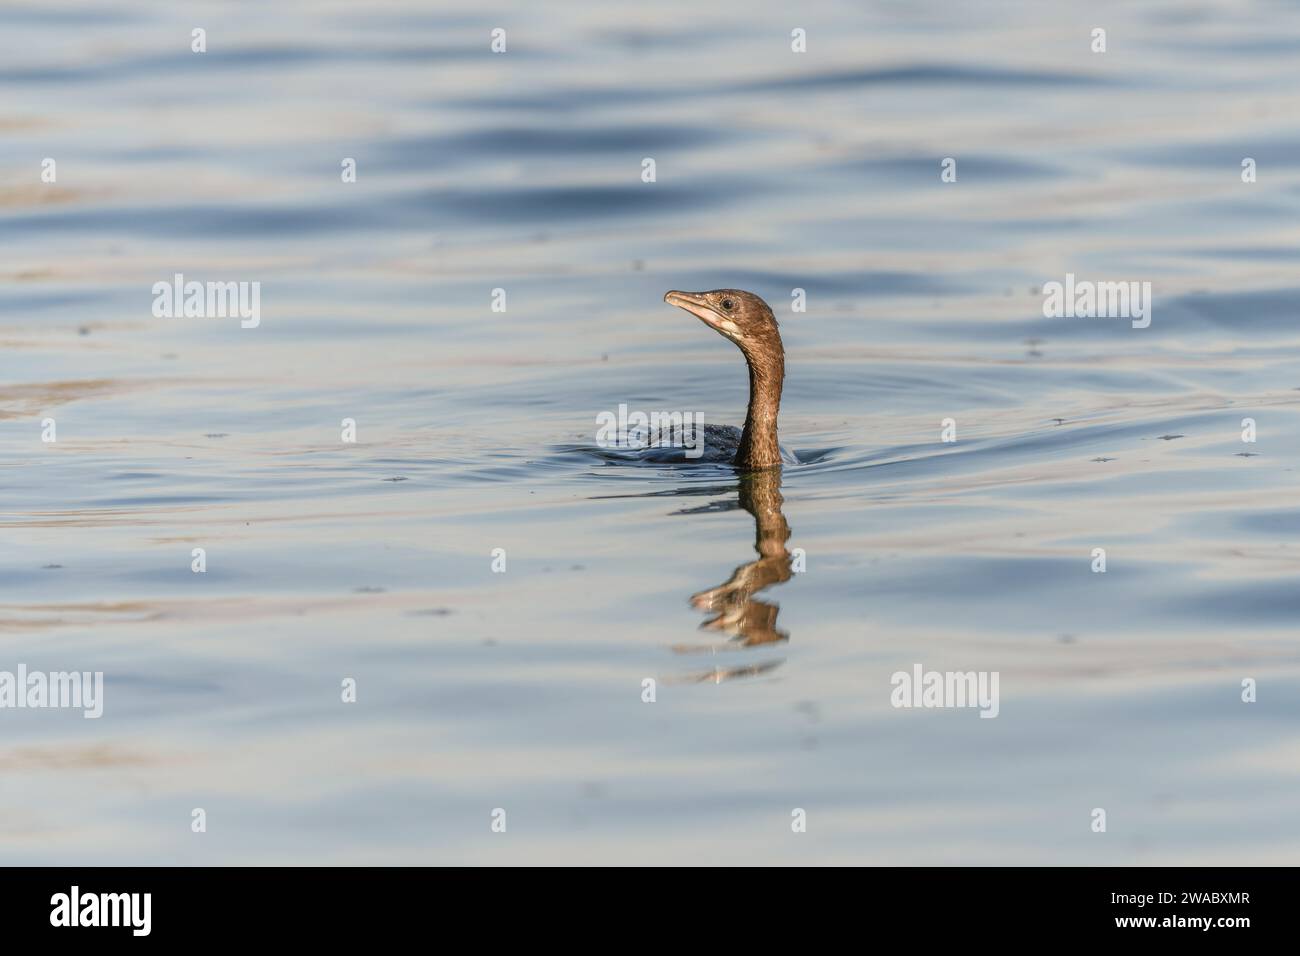 Pygmy cormorant (Microcarbo pygmaeus) swimming in the water in search of food. Bas-Rhin, Alsace,Grand Est, France, Europe. Stock Photo